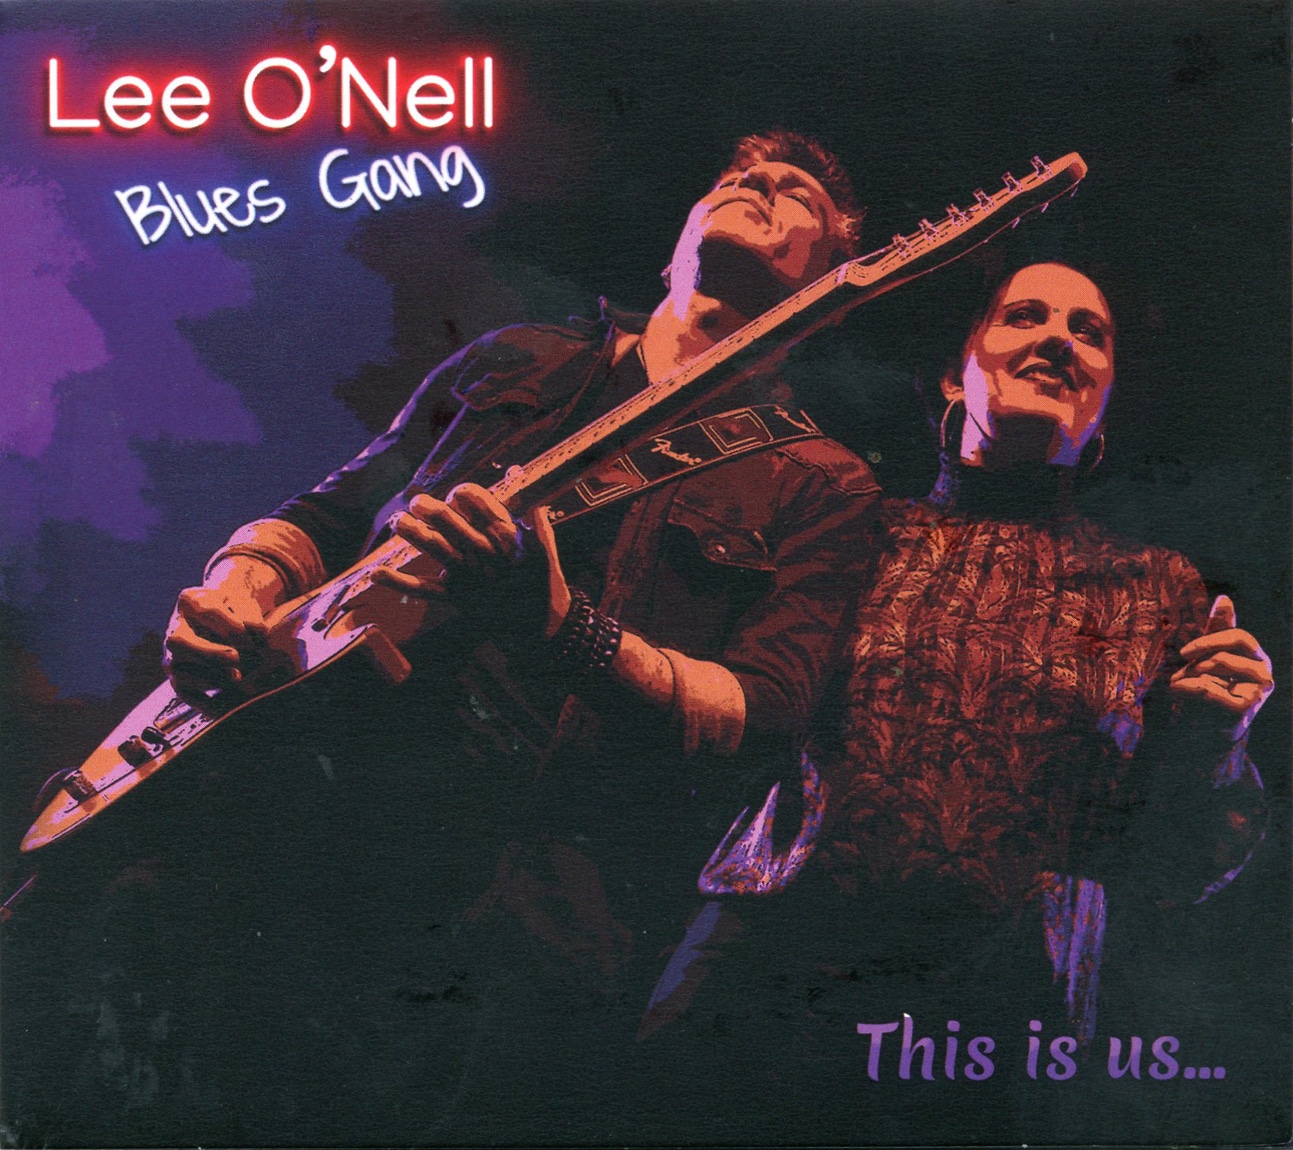 LEE O'NELL BLUES GANG - This Is Us